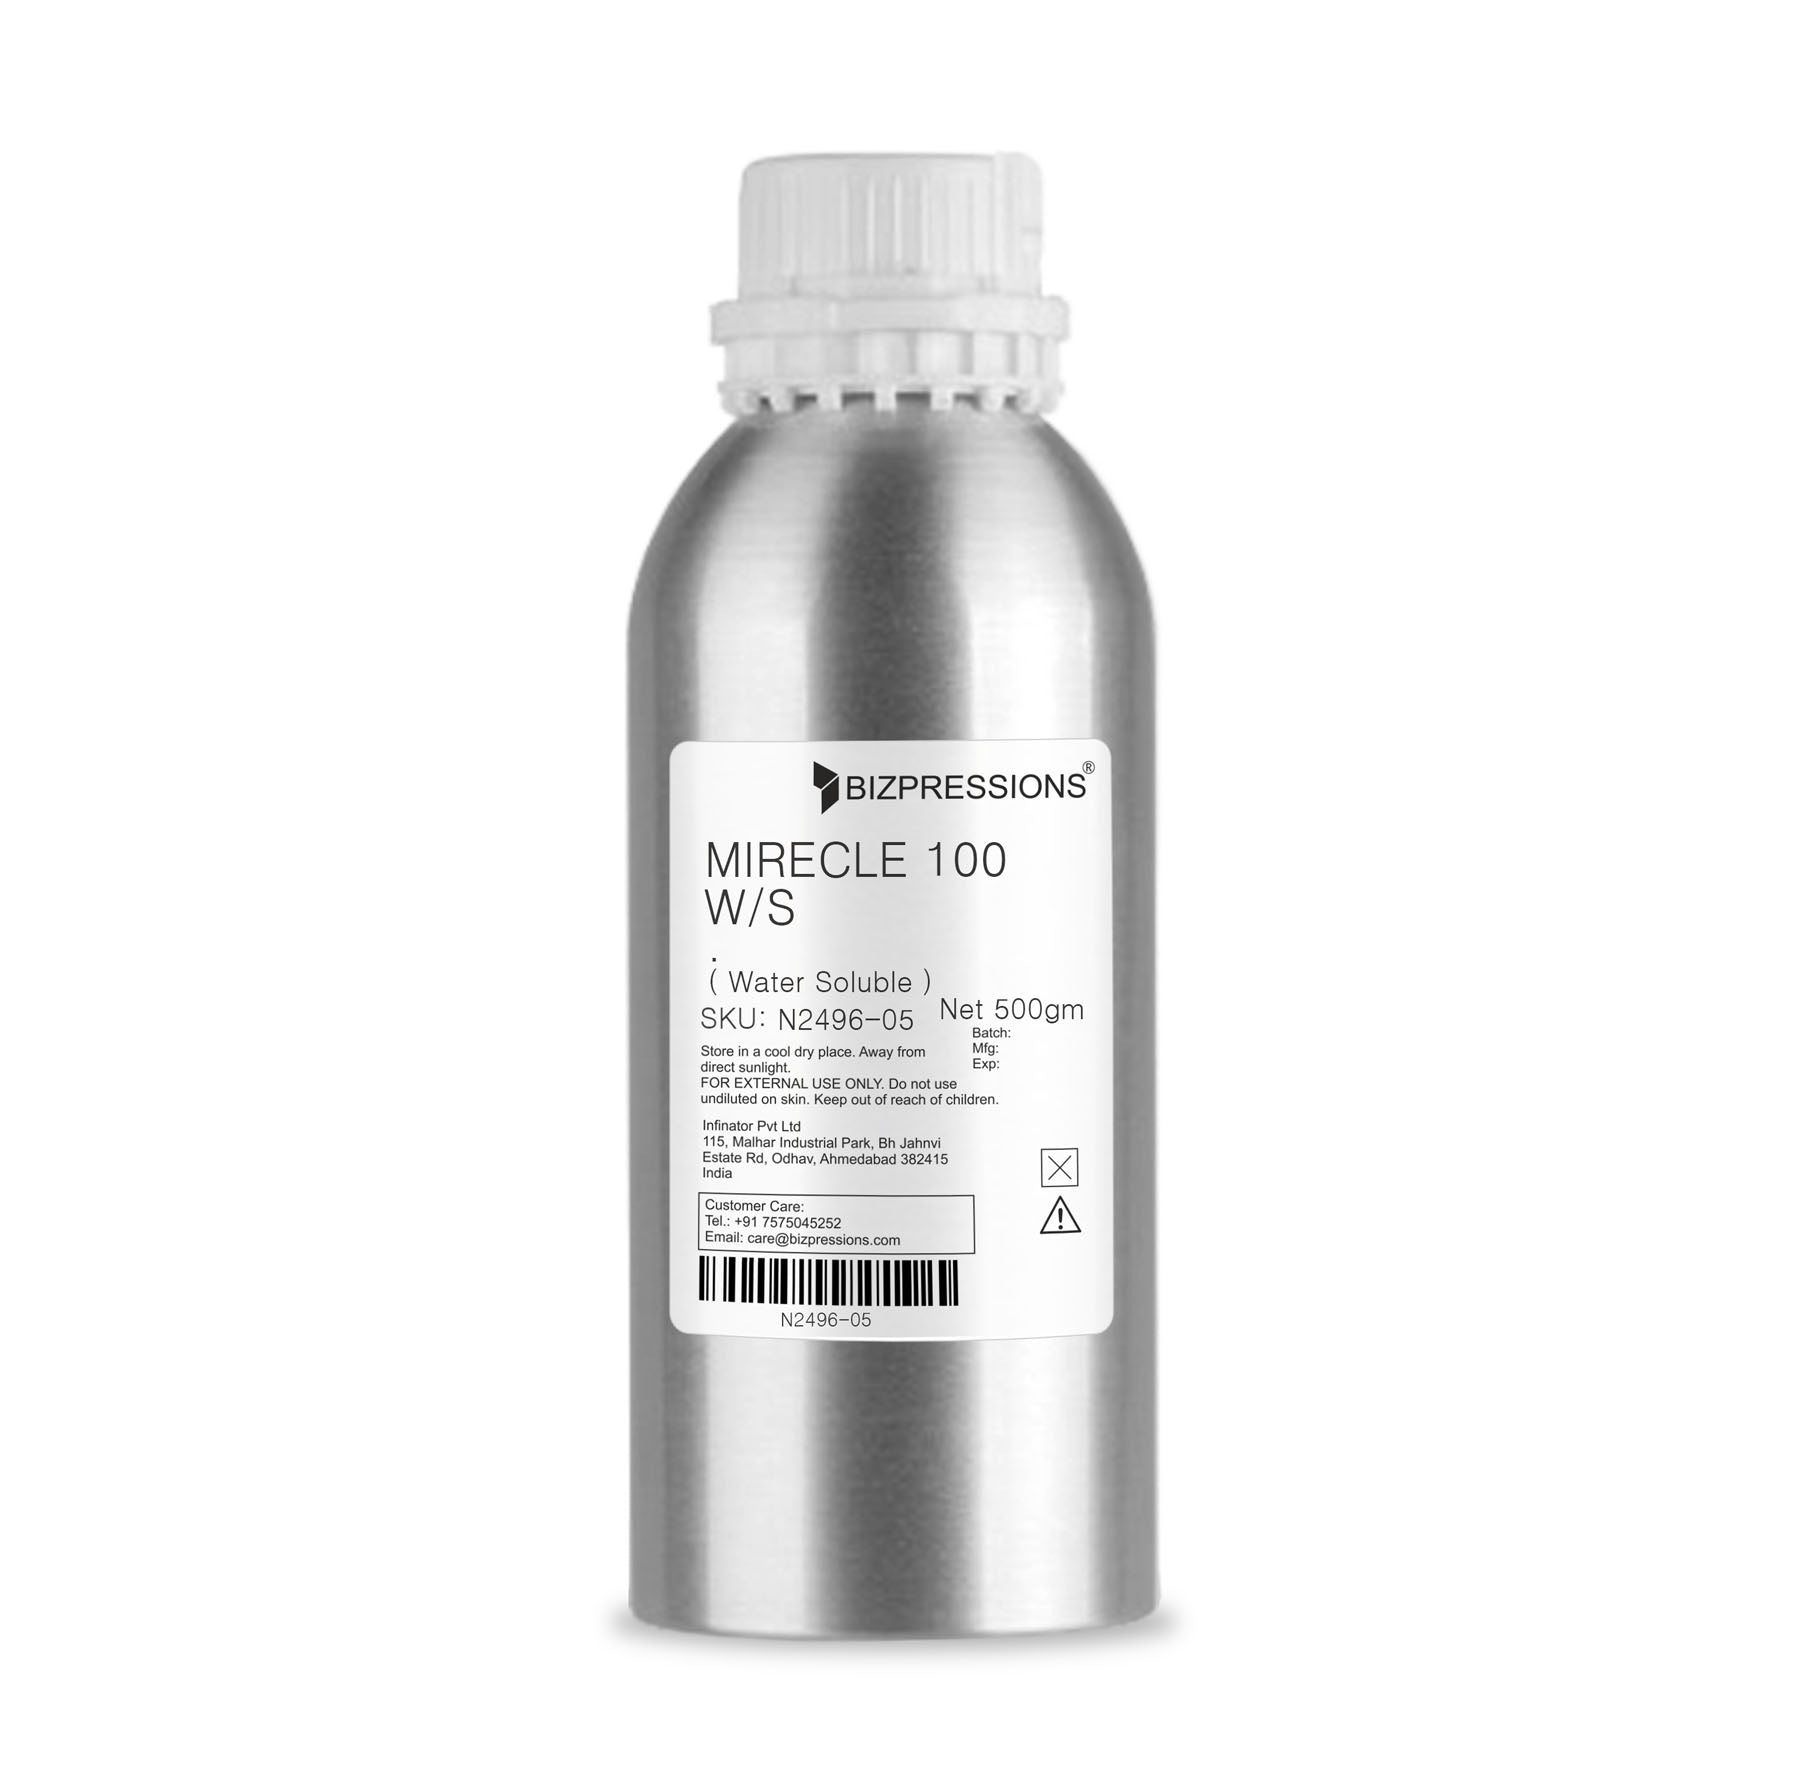 MIRECLE 100 W/S - Fragrance ( Water Soluble ) - 500 gm